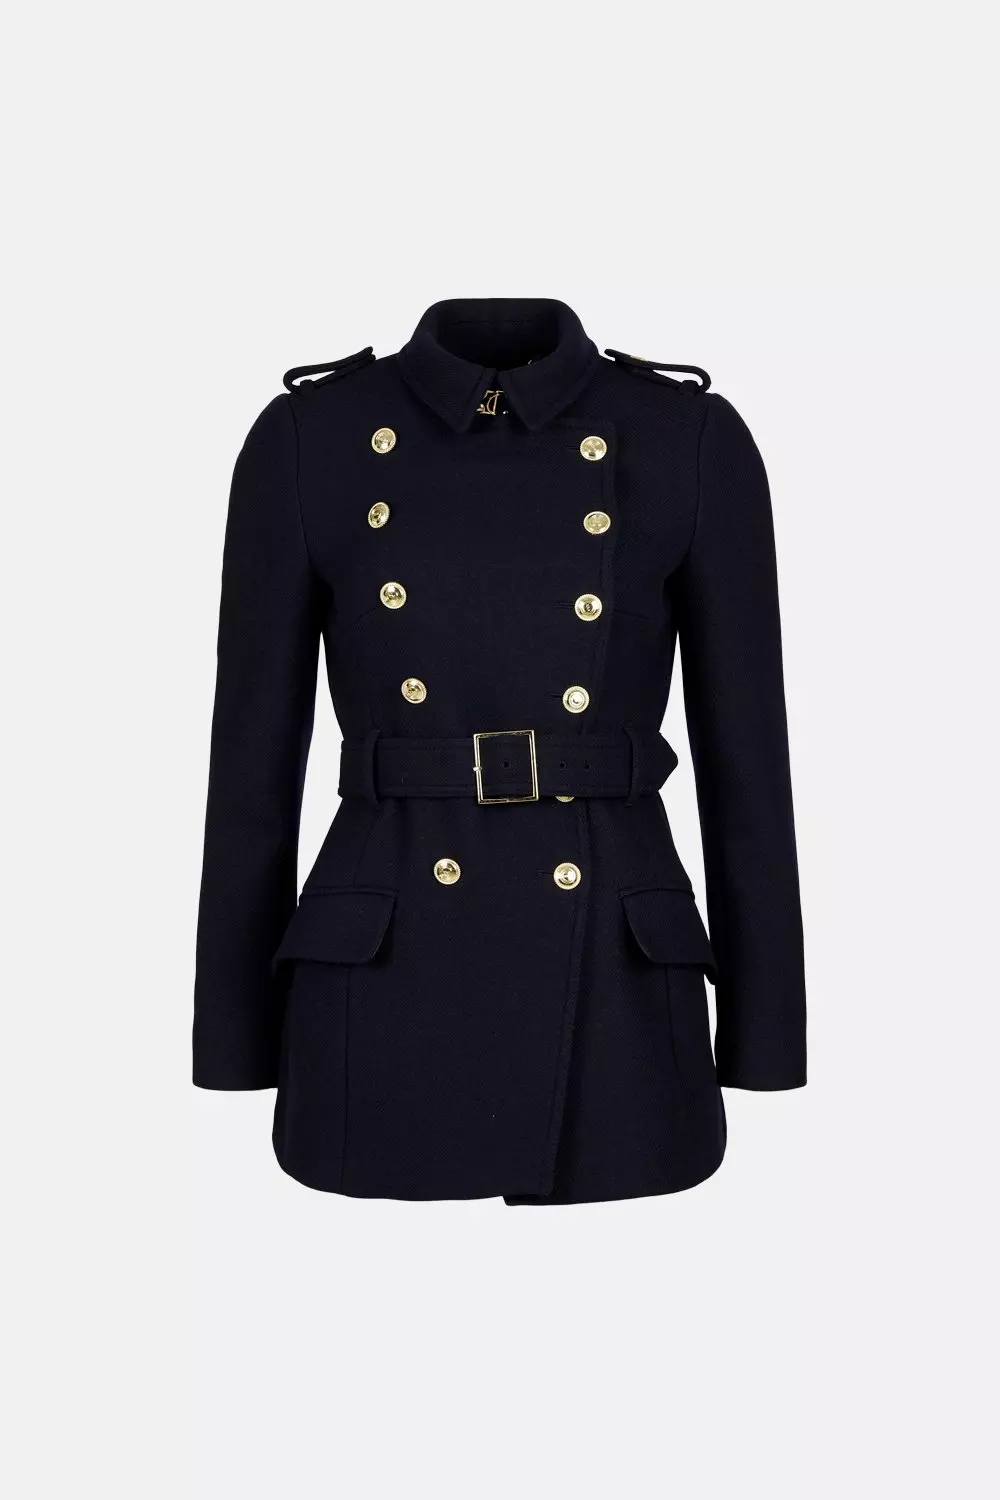 Mens Wool Blend Double Breasted Long Outwear Trench Coat Military Jacket  Outwear